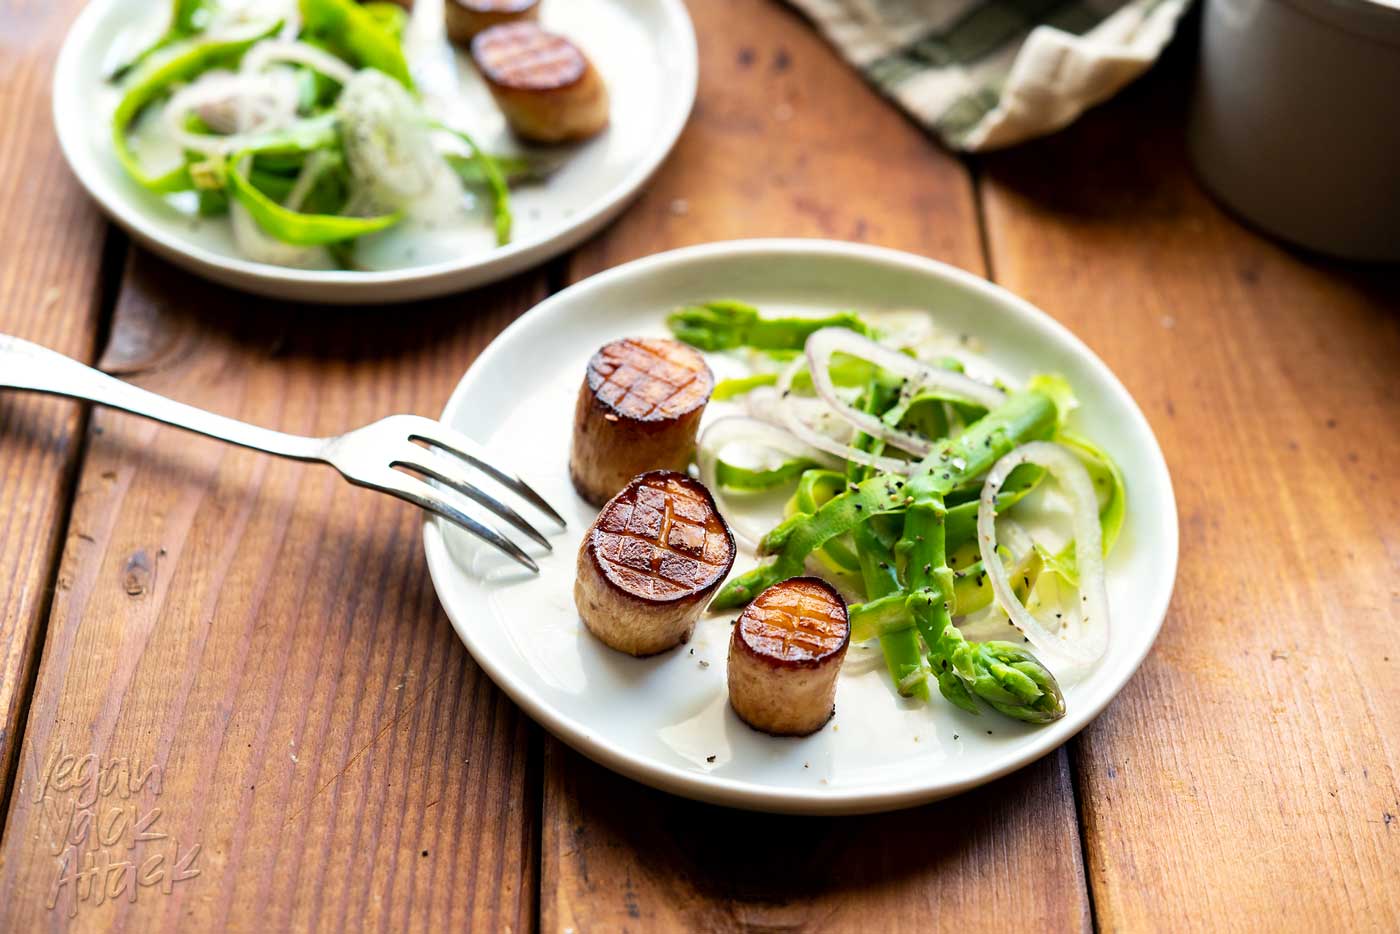 Incredible, vegan, King Oyster Scallops, made from King Oyster Mushrooms! Recipe from The Wicked Healthy Cookbook, and makes for an impressive appetizer.